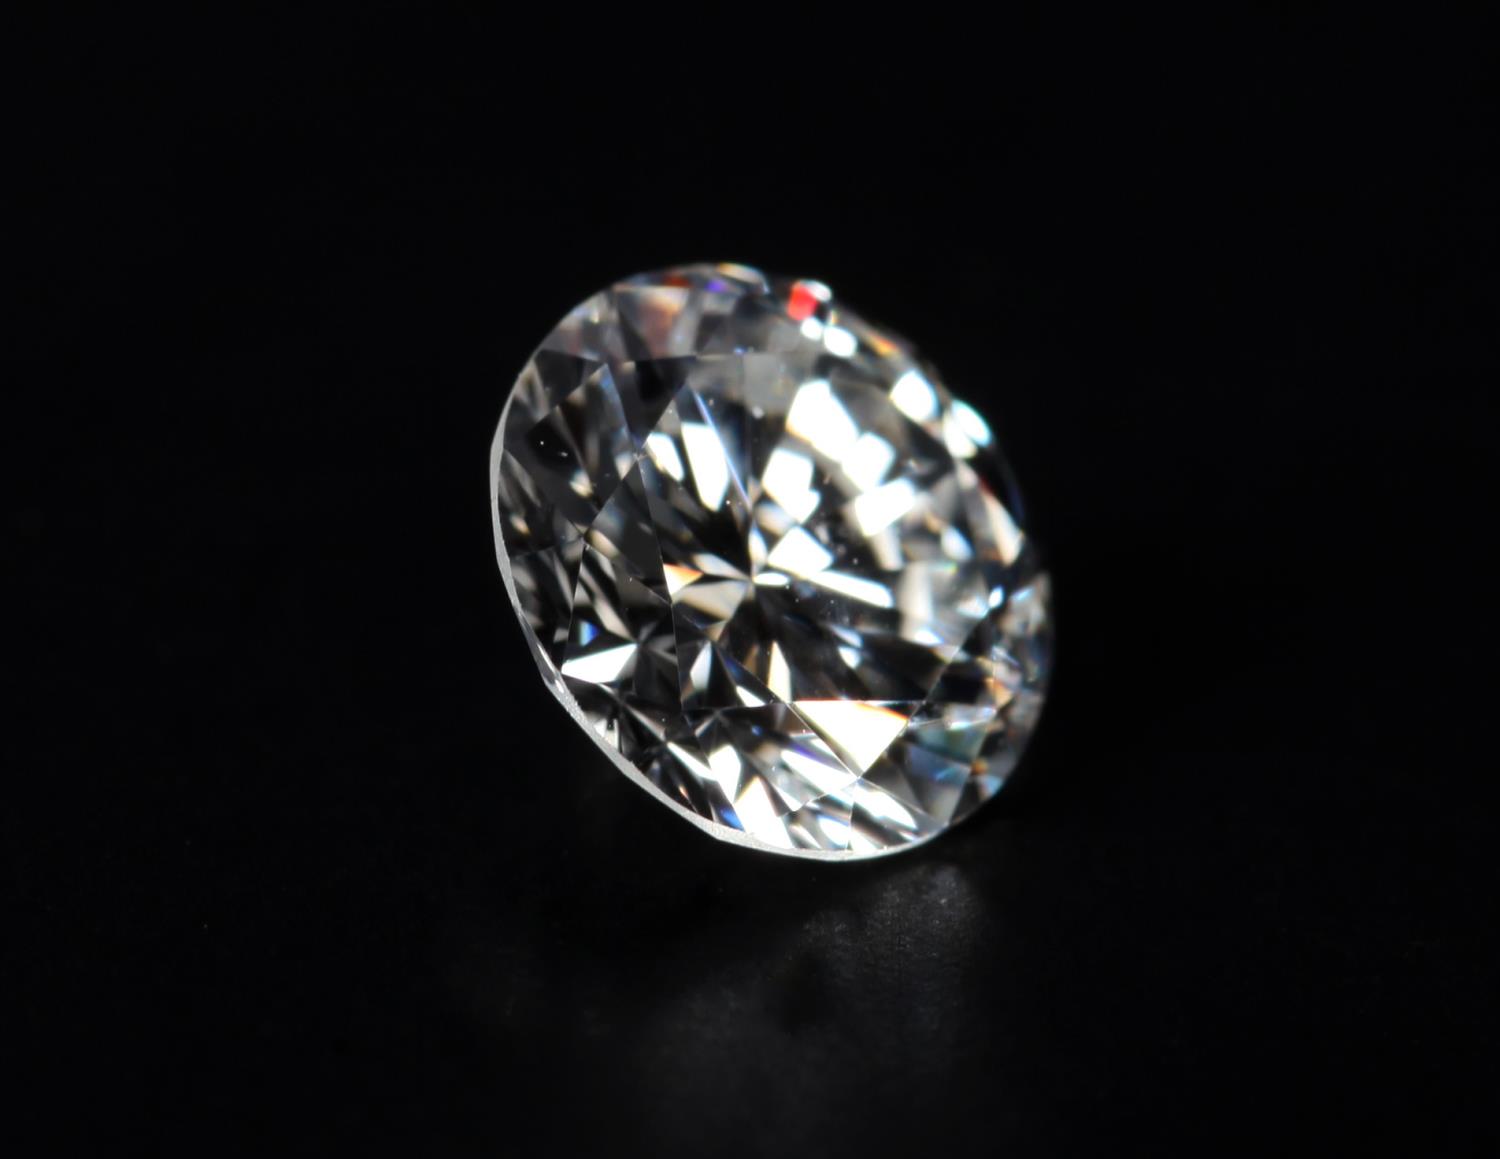 A ROUND BRILLIANT CUT DIAMOND Approximate weight 1.03ct Clarity grade VVS1 Colour grade F Anchor - Image 2 of 4